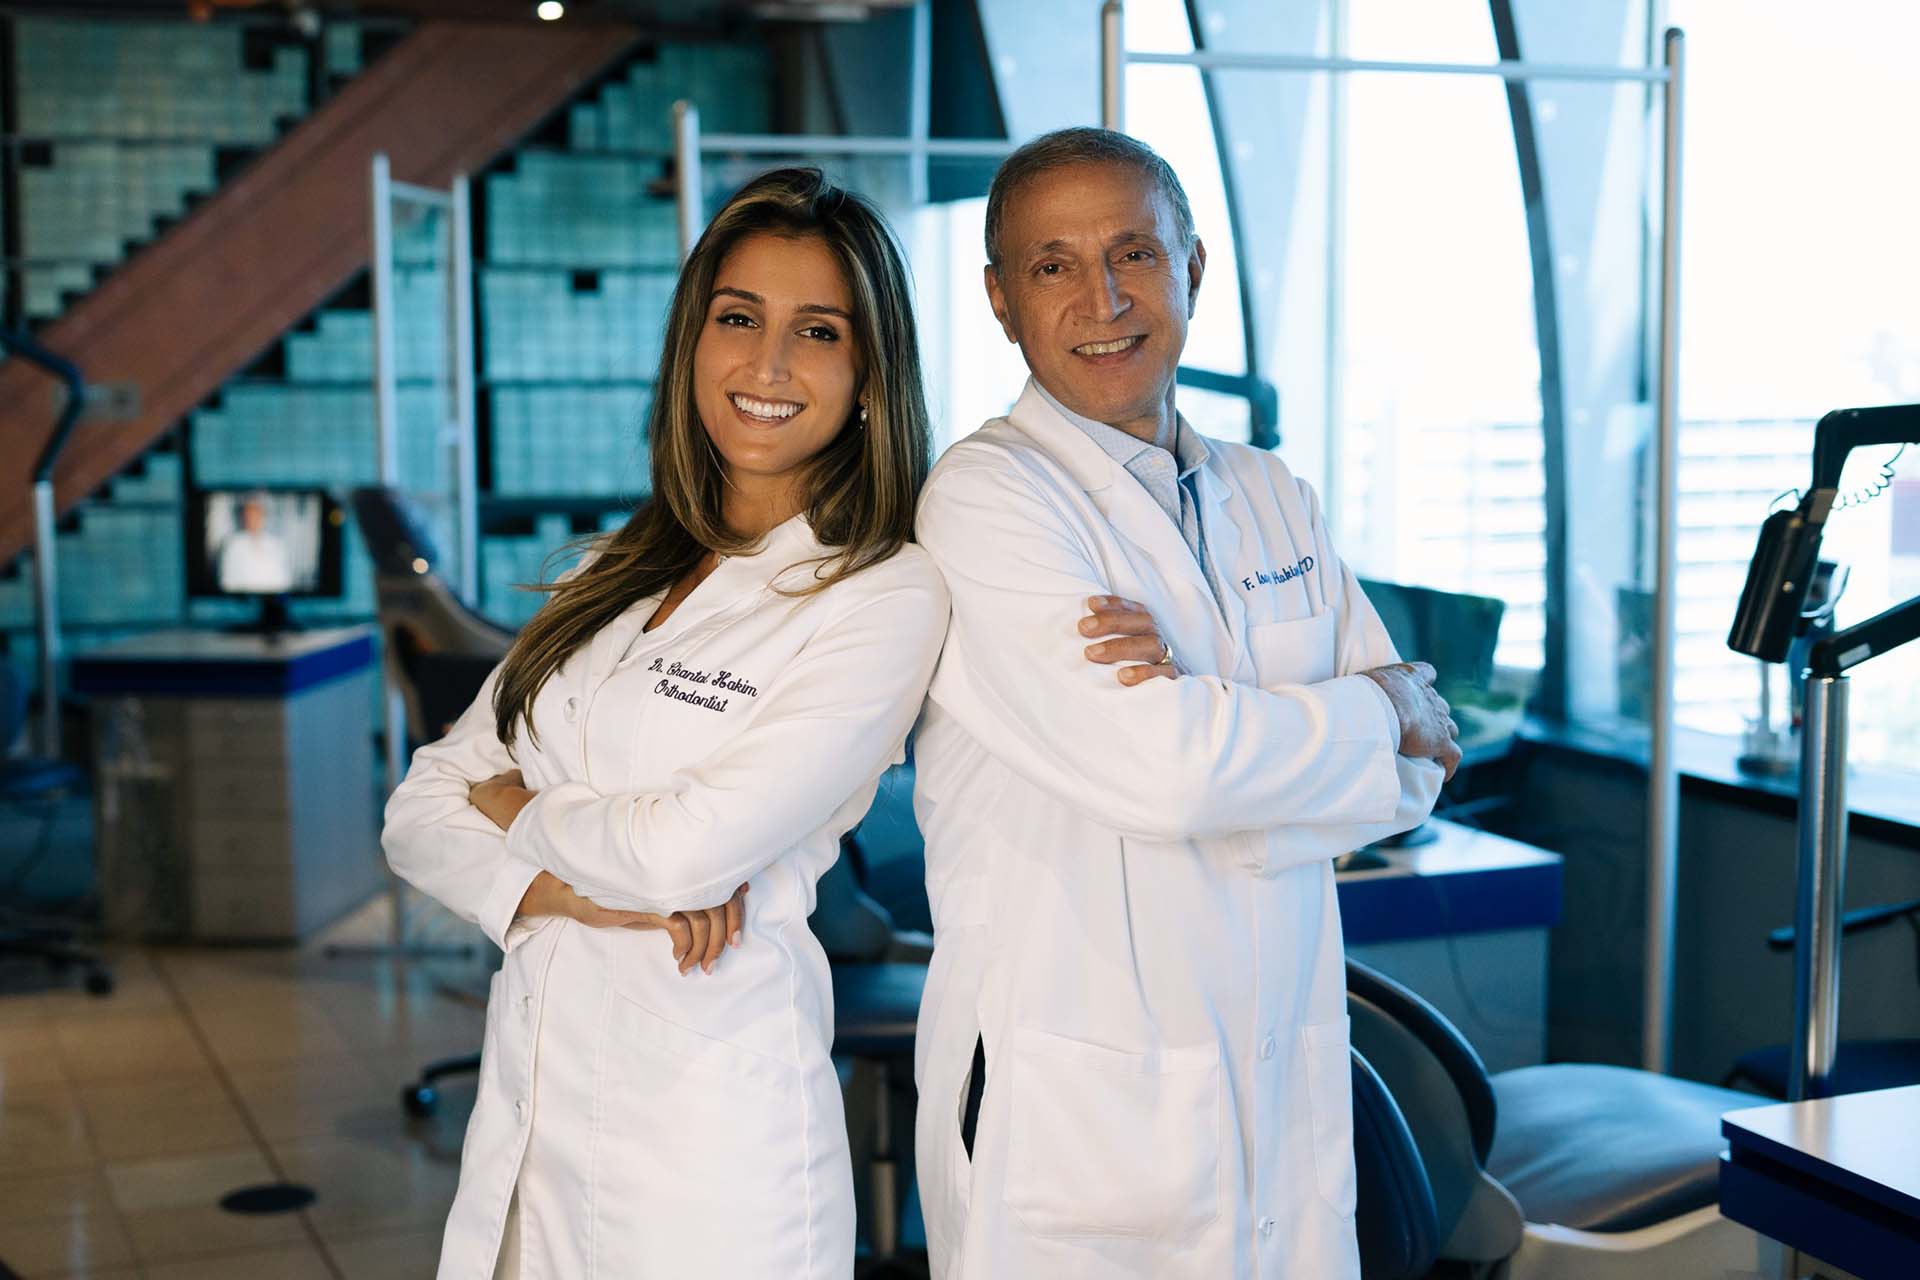 Dr. Chantal Hakim and Dr. F. Isaac Hakim at the Orthospaceship in Los Angeles, a Southern California orthodontic practice serving Studio City, Los Angeles.